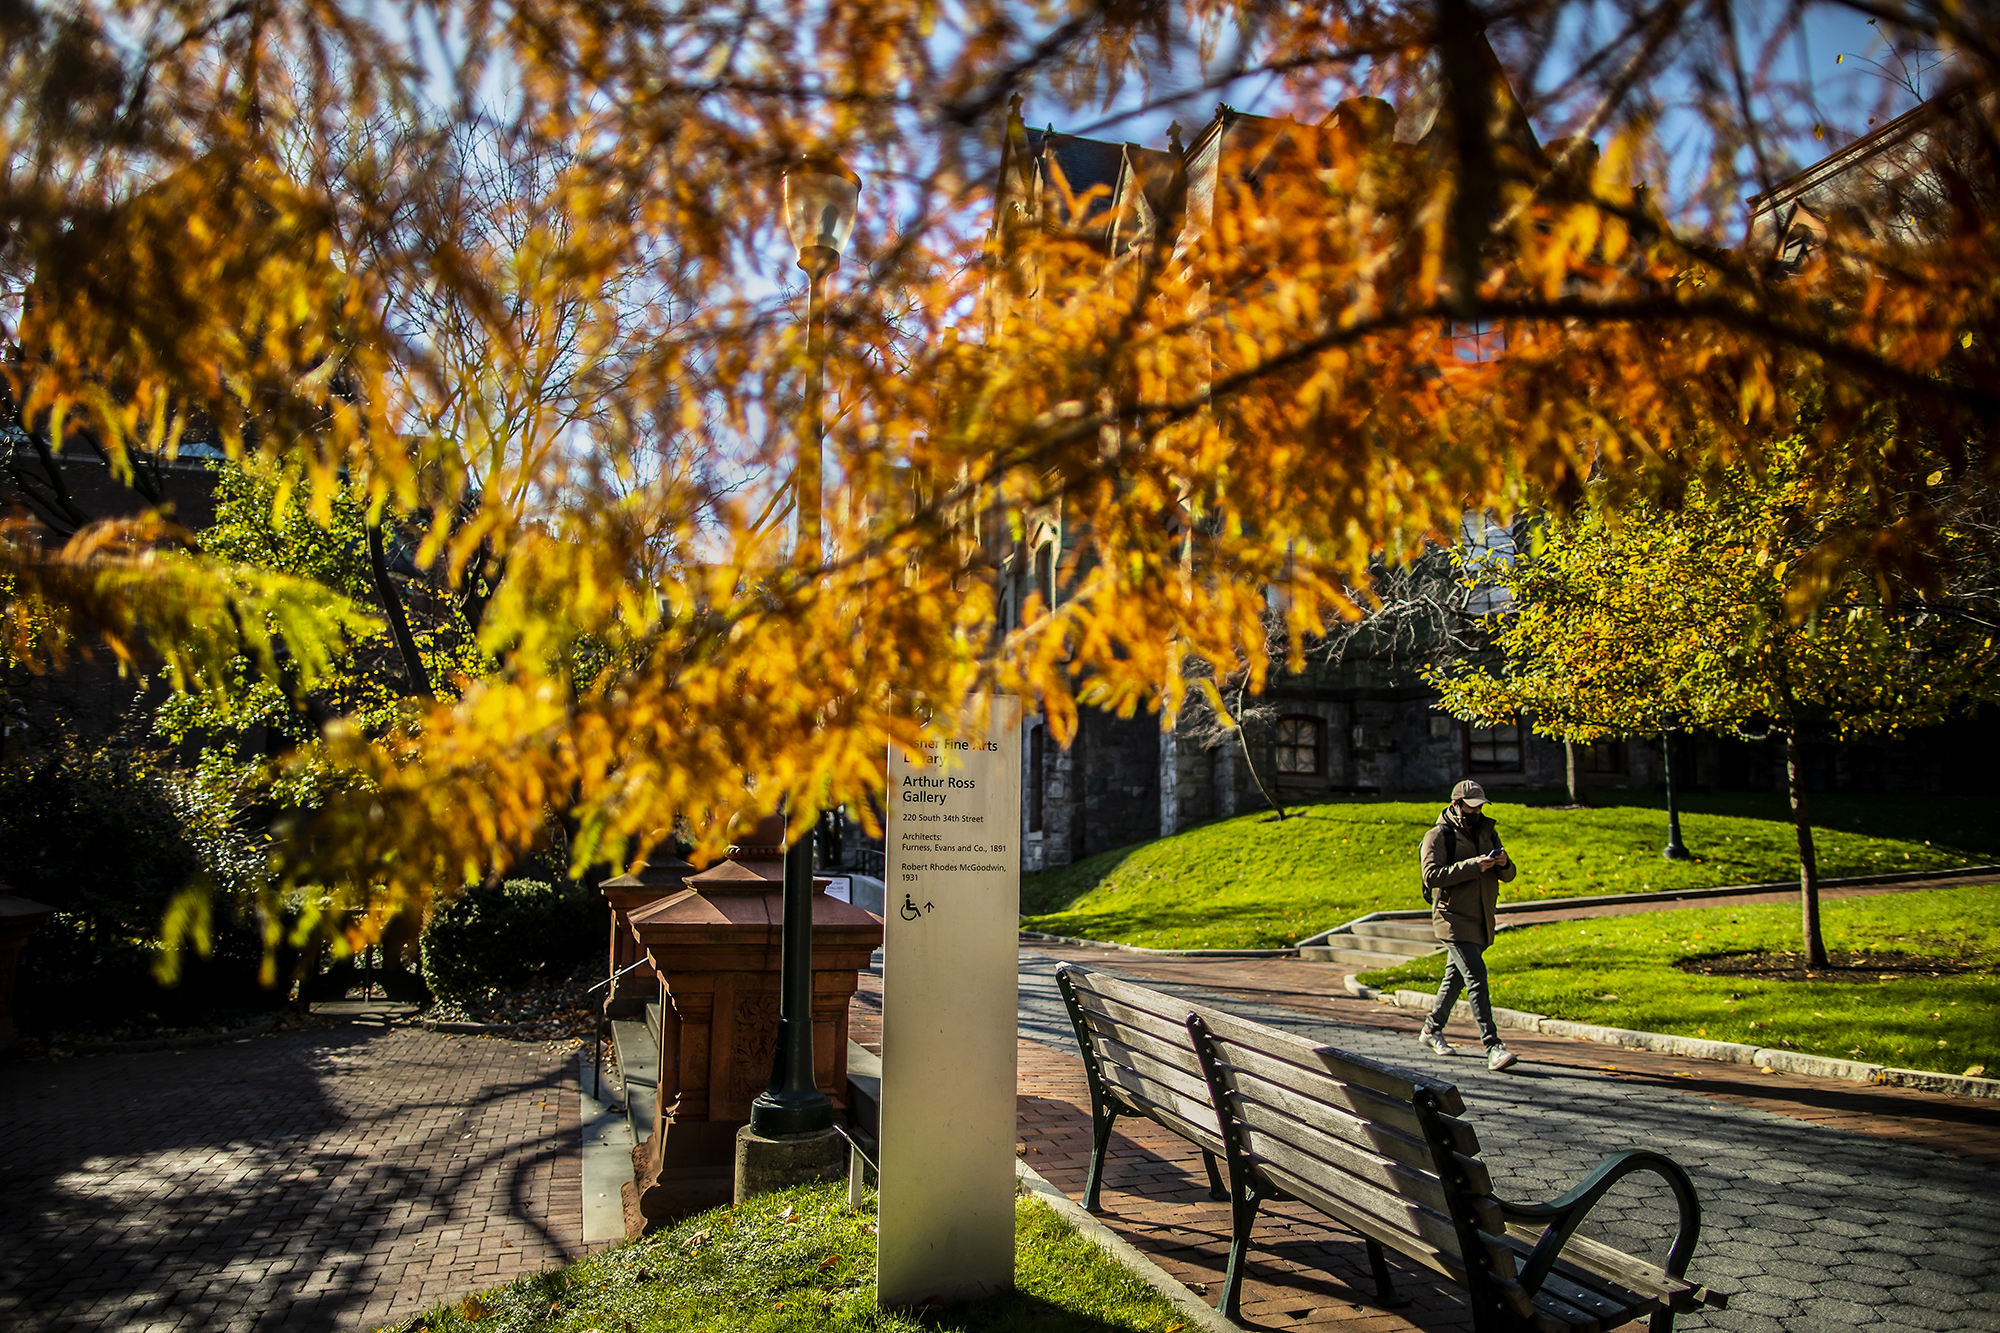 Person walking past the signpost for the Arthur Ross Gallery on Locust Walk surrounded by fall foliage.